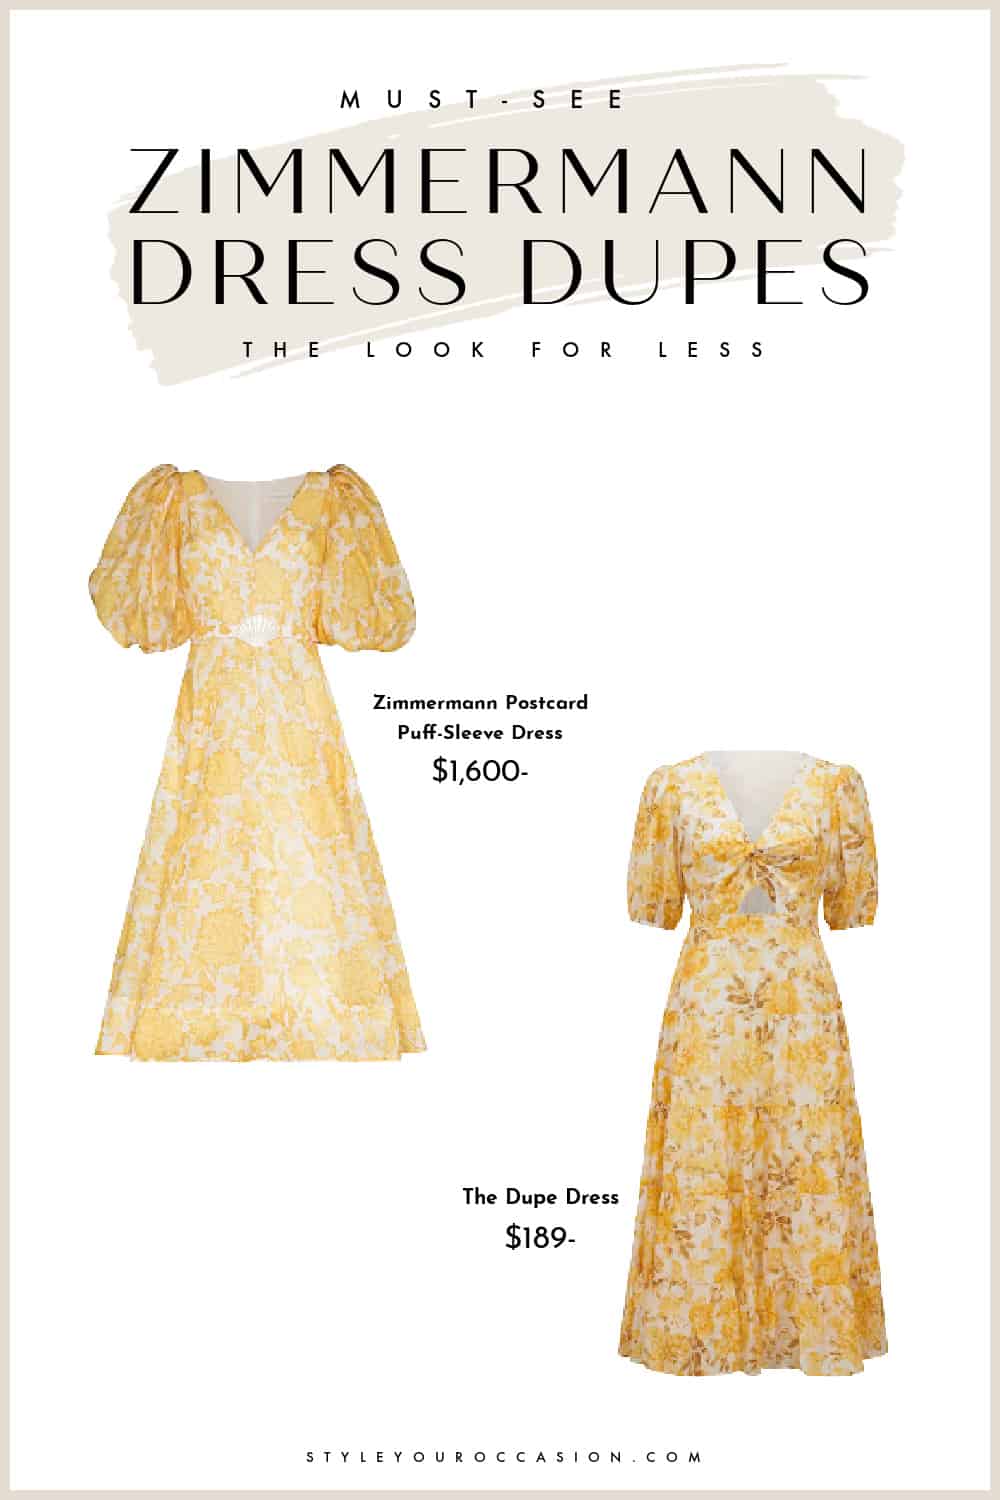 Image of a yellow puff-sleeve Zimmermann dress alongside a similar looking dress dupe